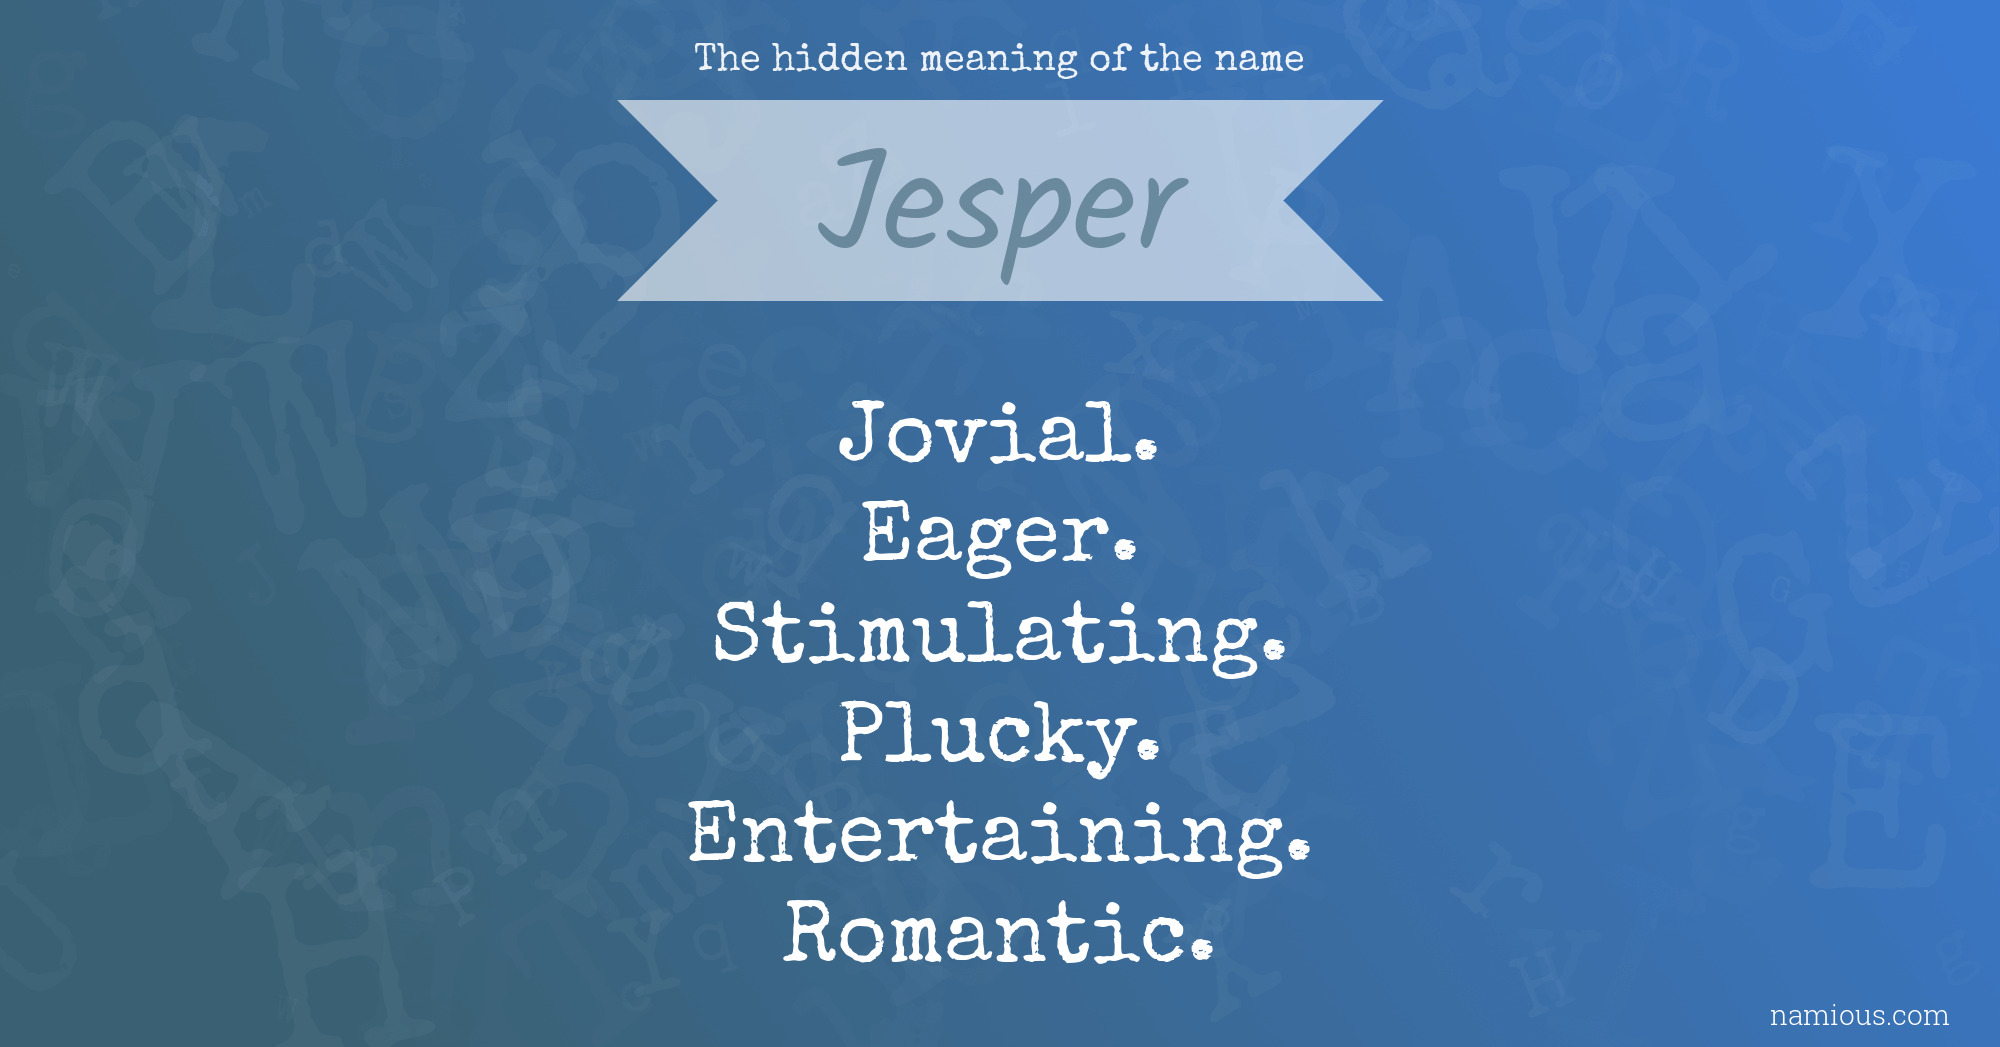 The hidden meaning of the name Jesper